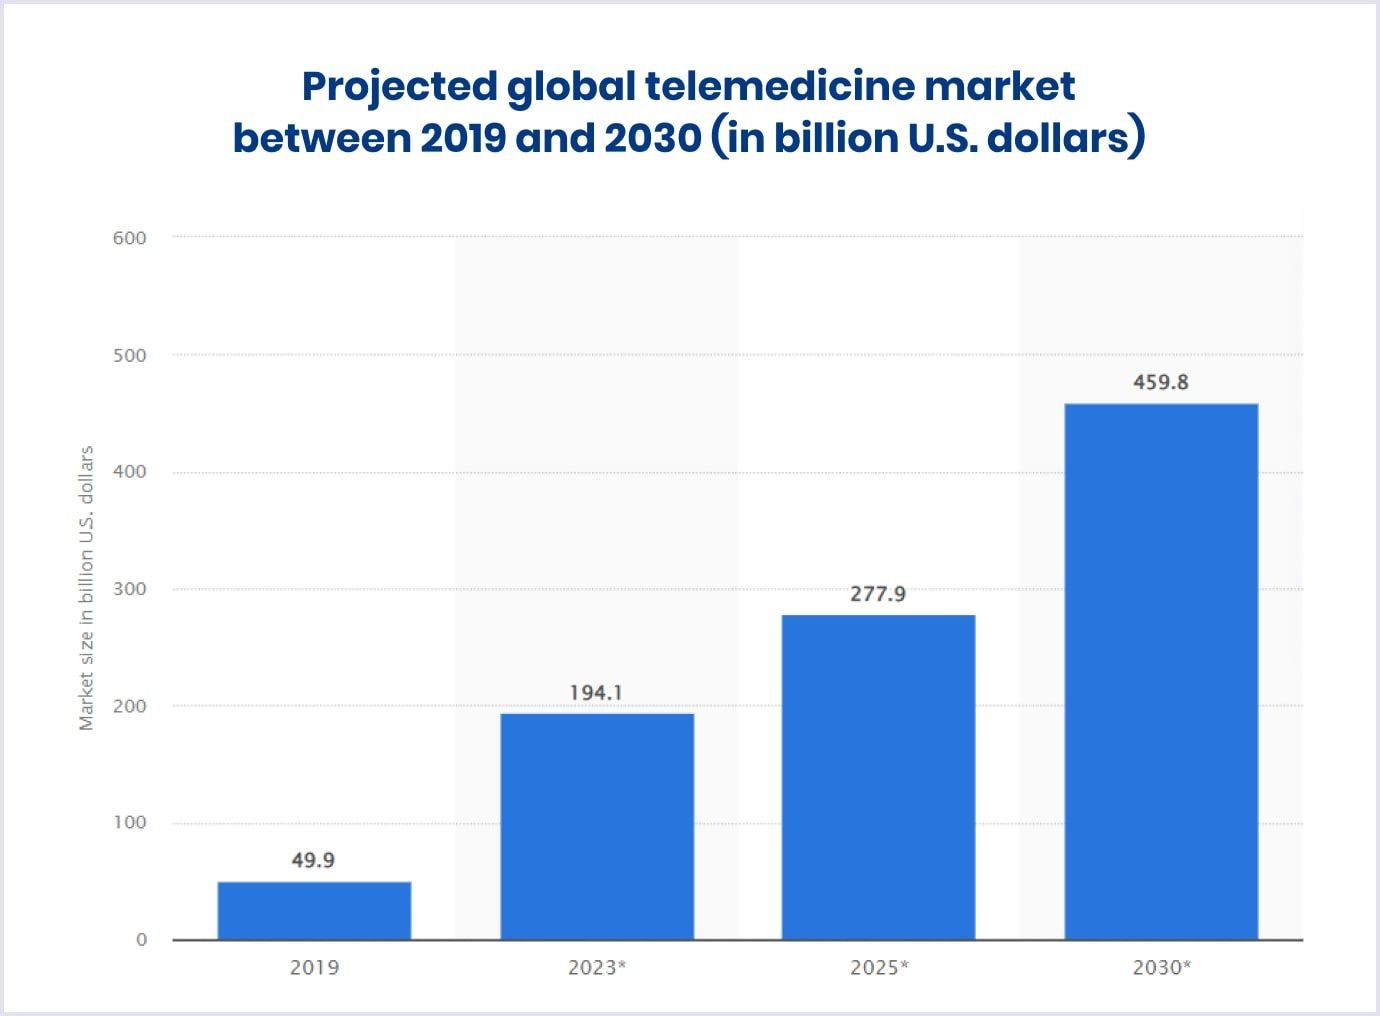 Forecast for telemedicine market by Statista for 2019 - 2030